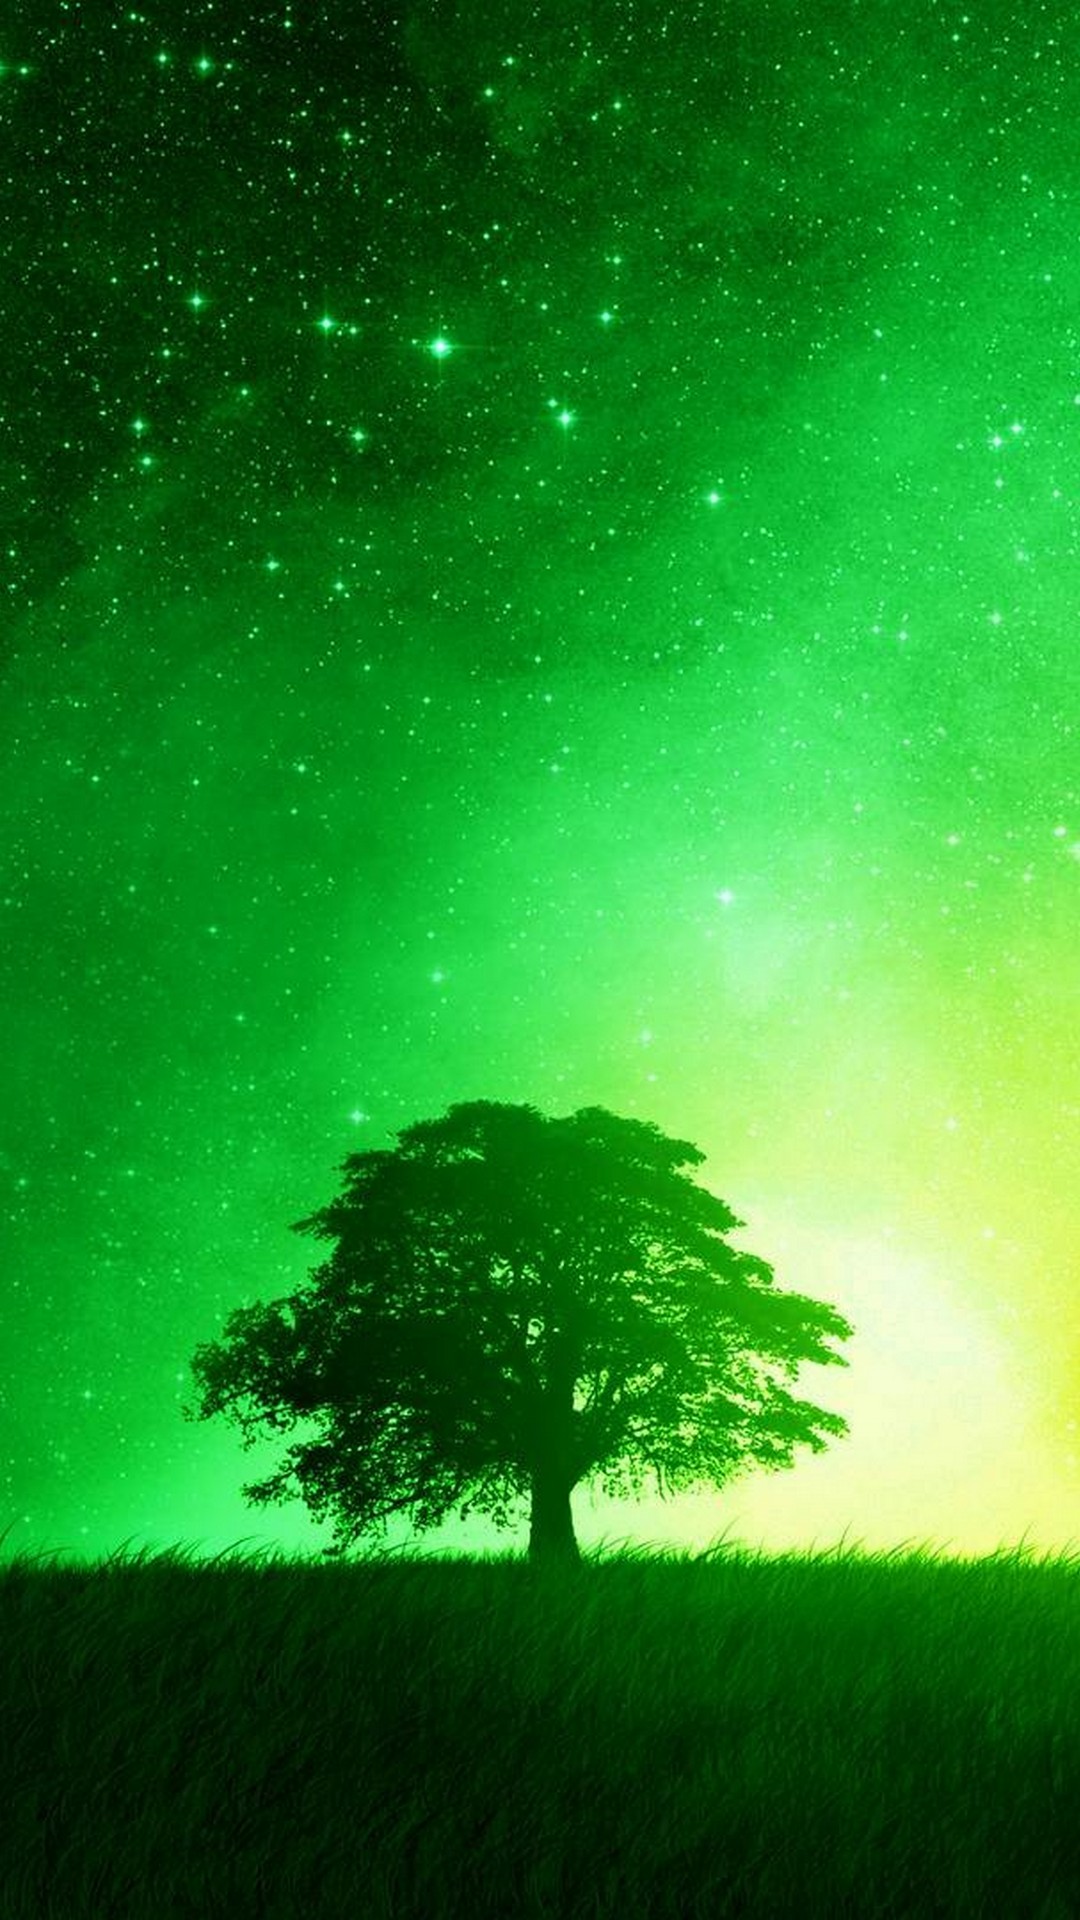 iPhone X Wallpaper Nature Green with resolution 1080X1920 pixel. You can make this wallpaper for your iPhone 5, 6, 7, 8, X backgrounds, Mobile Screensaver, or iPad Lock Screen